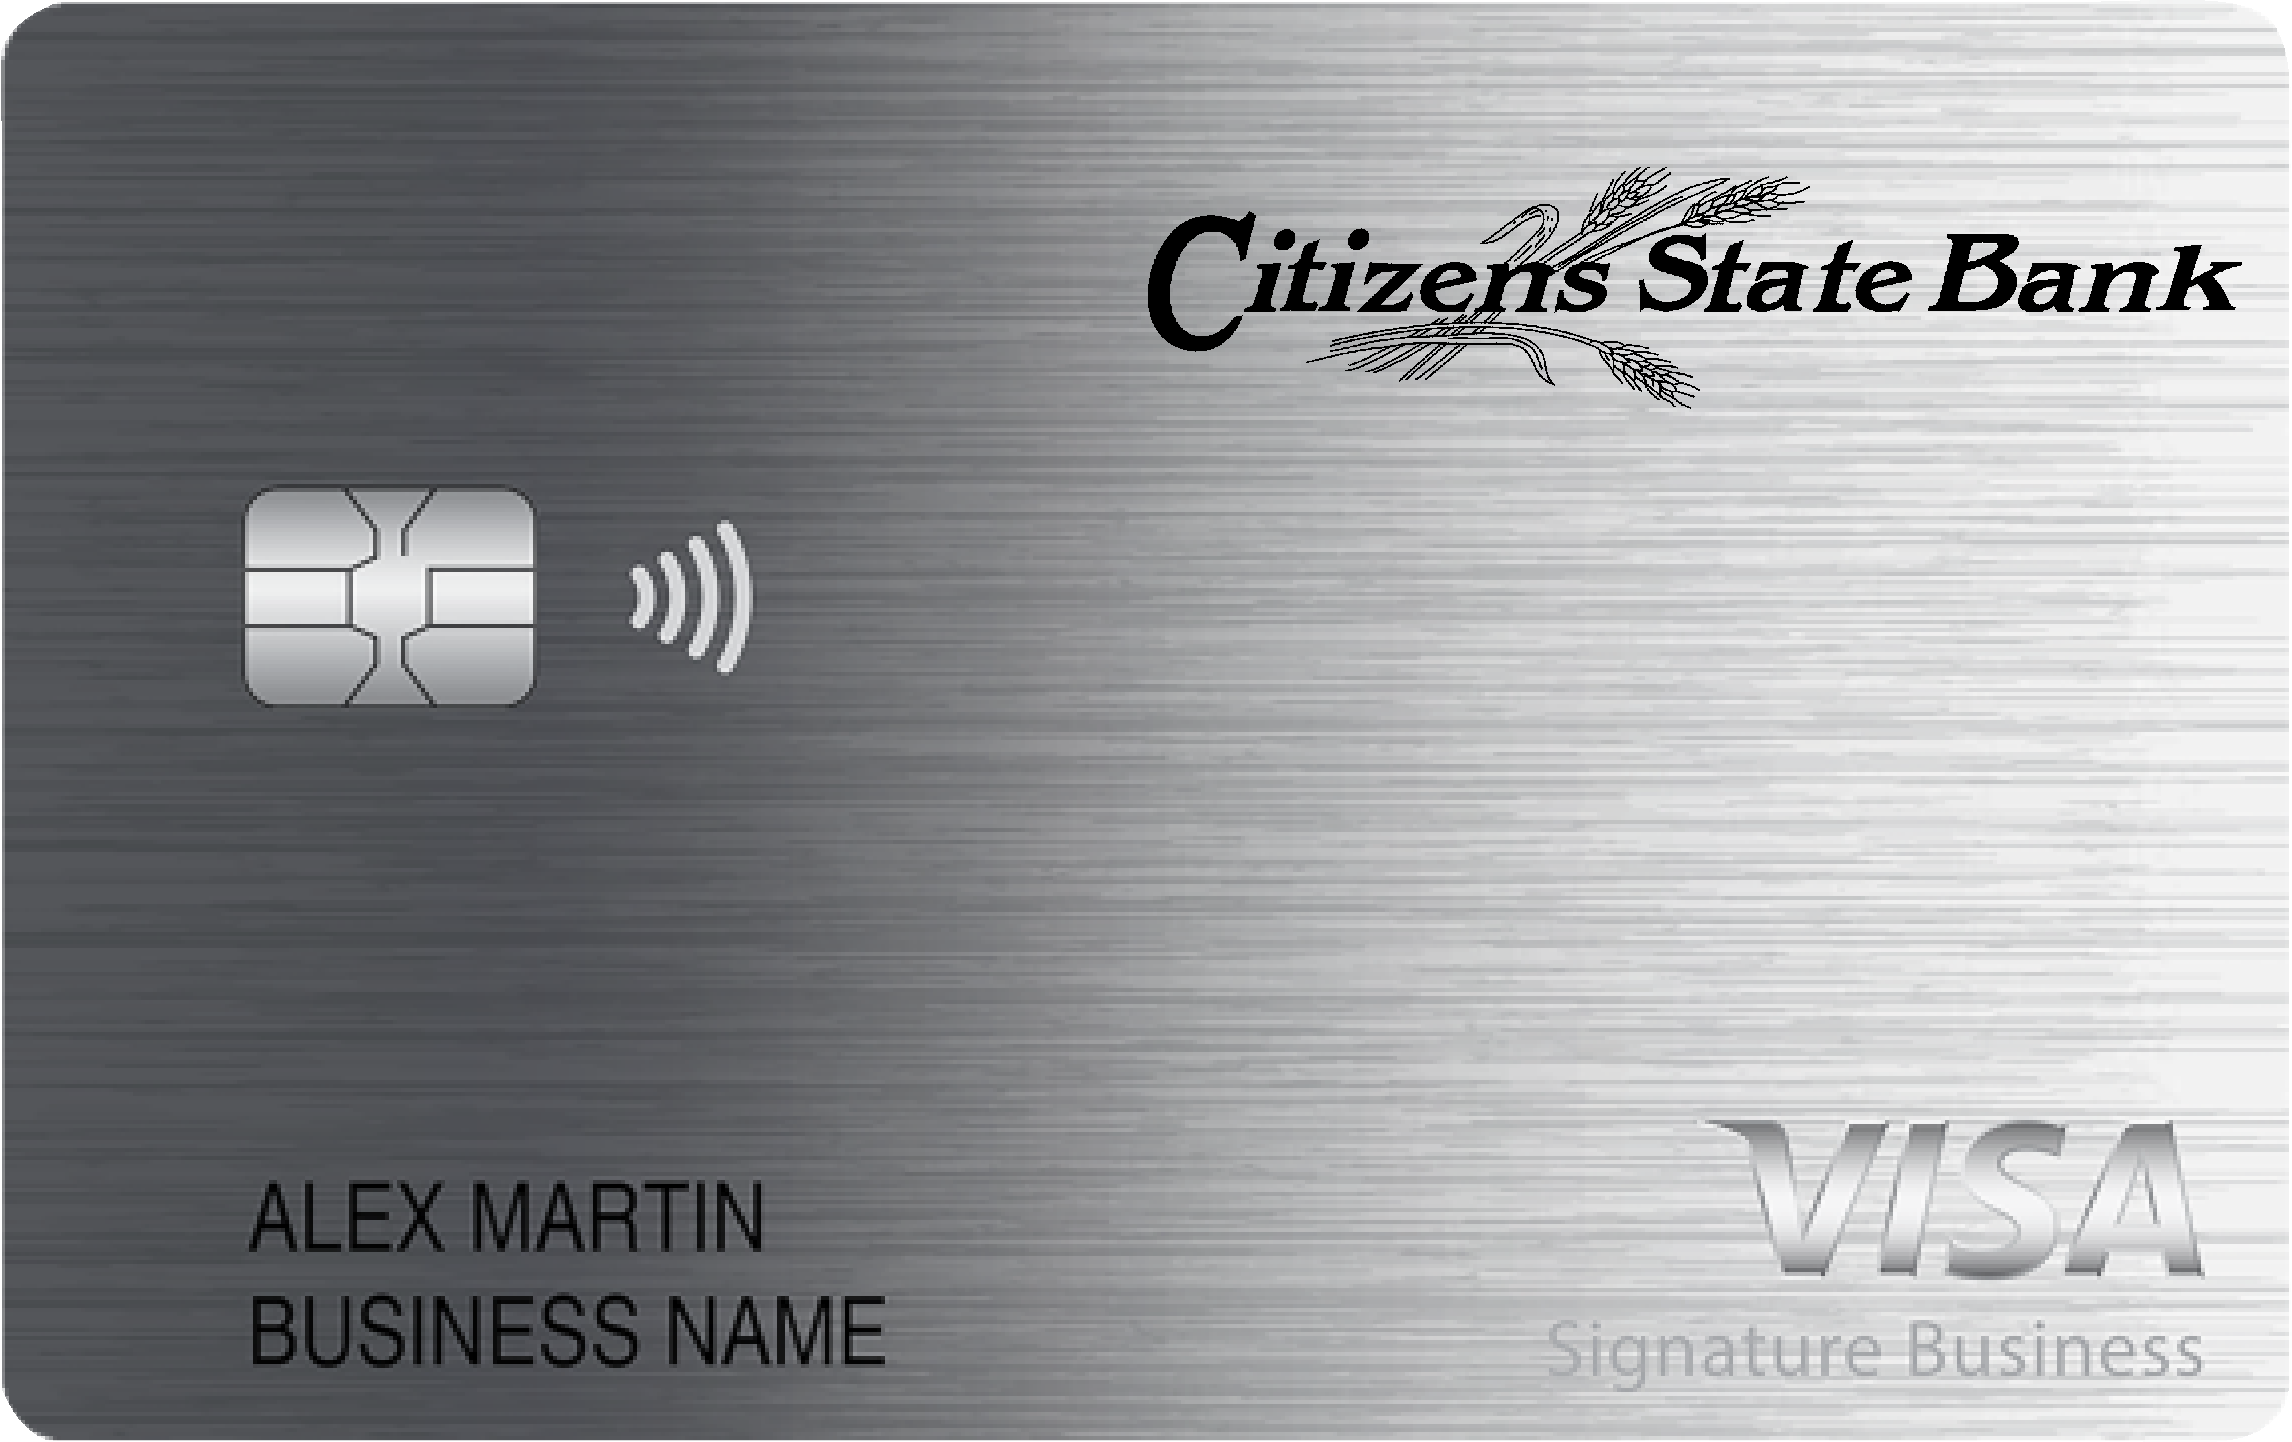 Citizens State Bank Of Lankin Smart Business Rewards Card